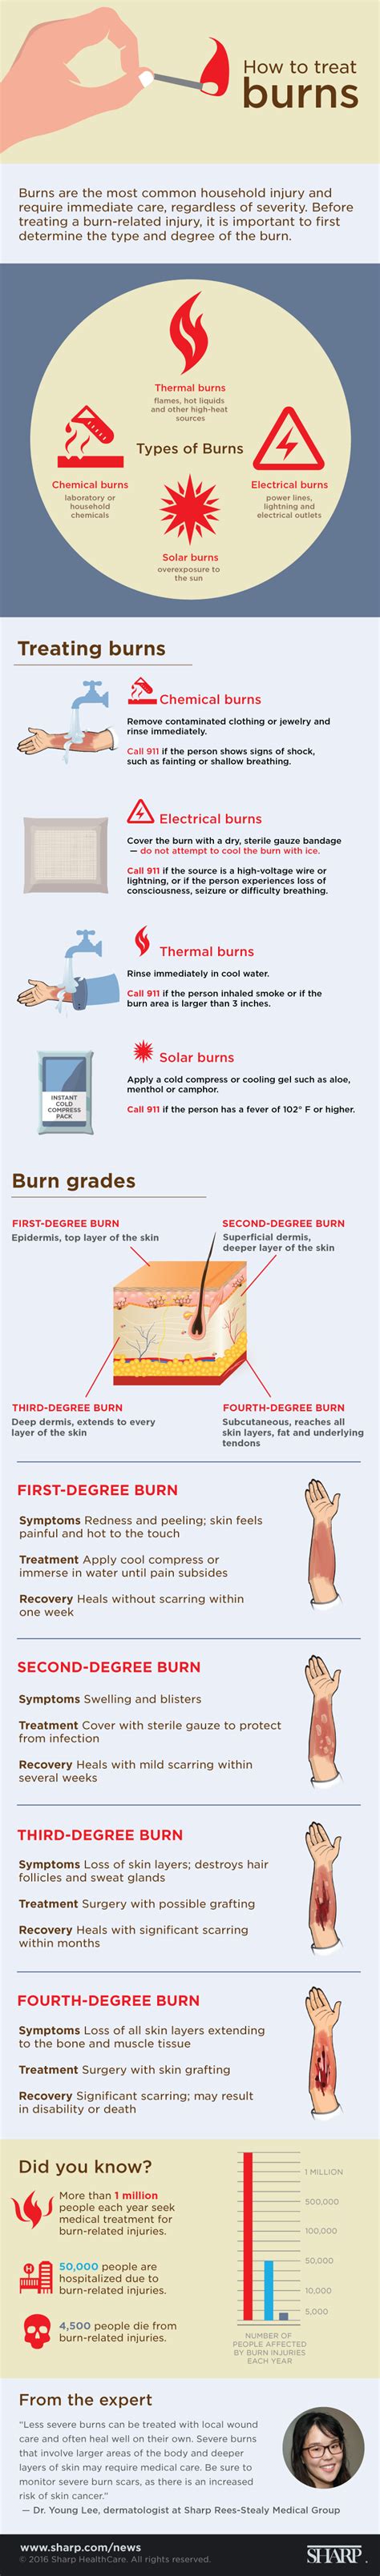 How To Treat Burns Infographic A Very Complete Infographic With The